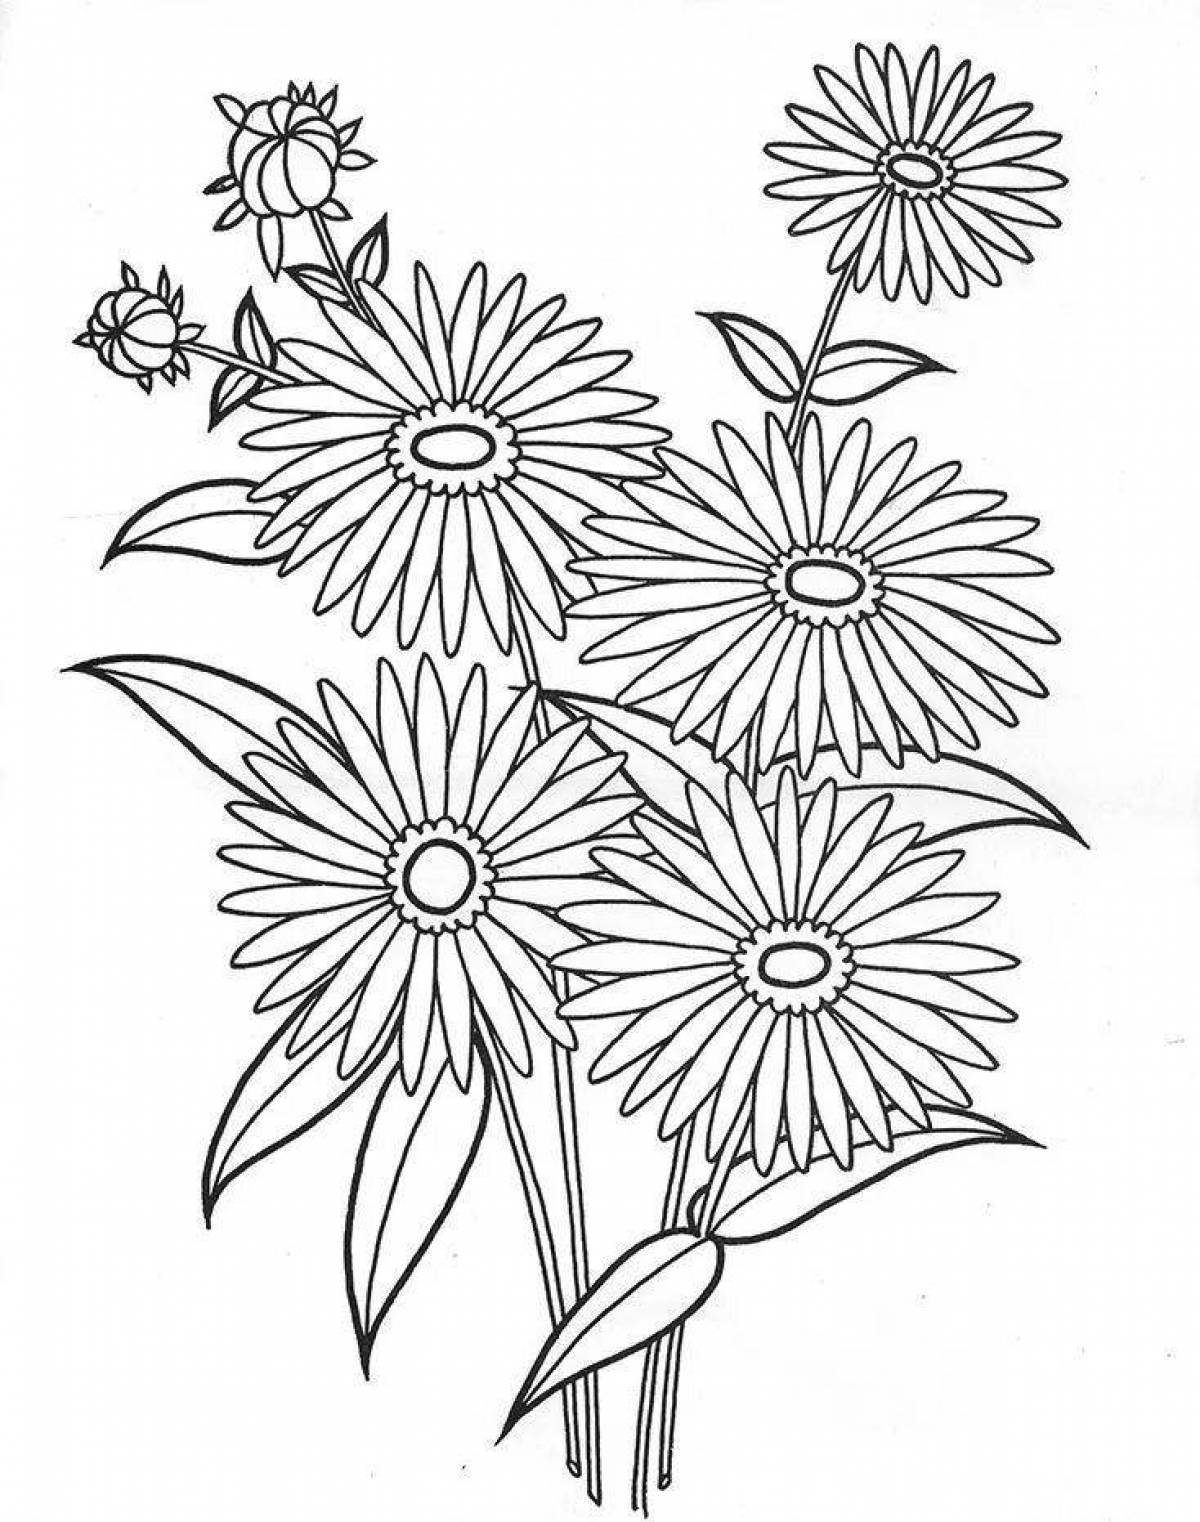 Coloring book peaceful bouquet of daisies